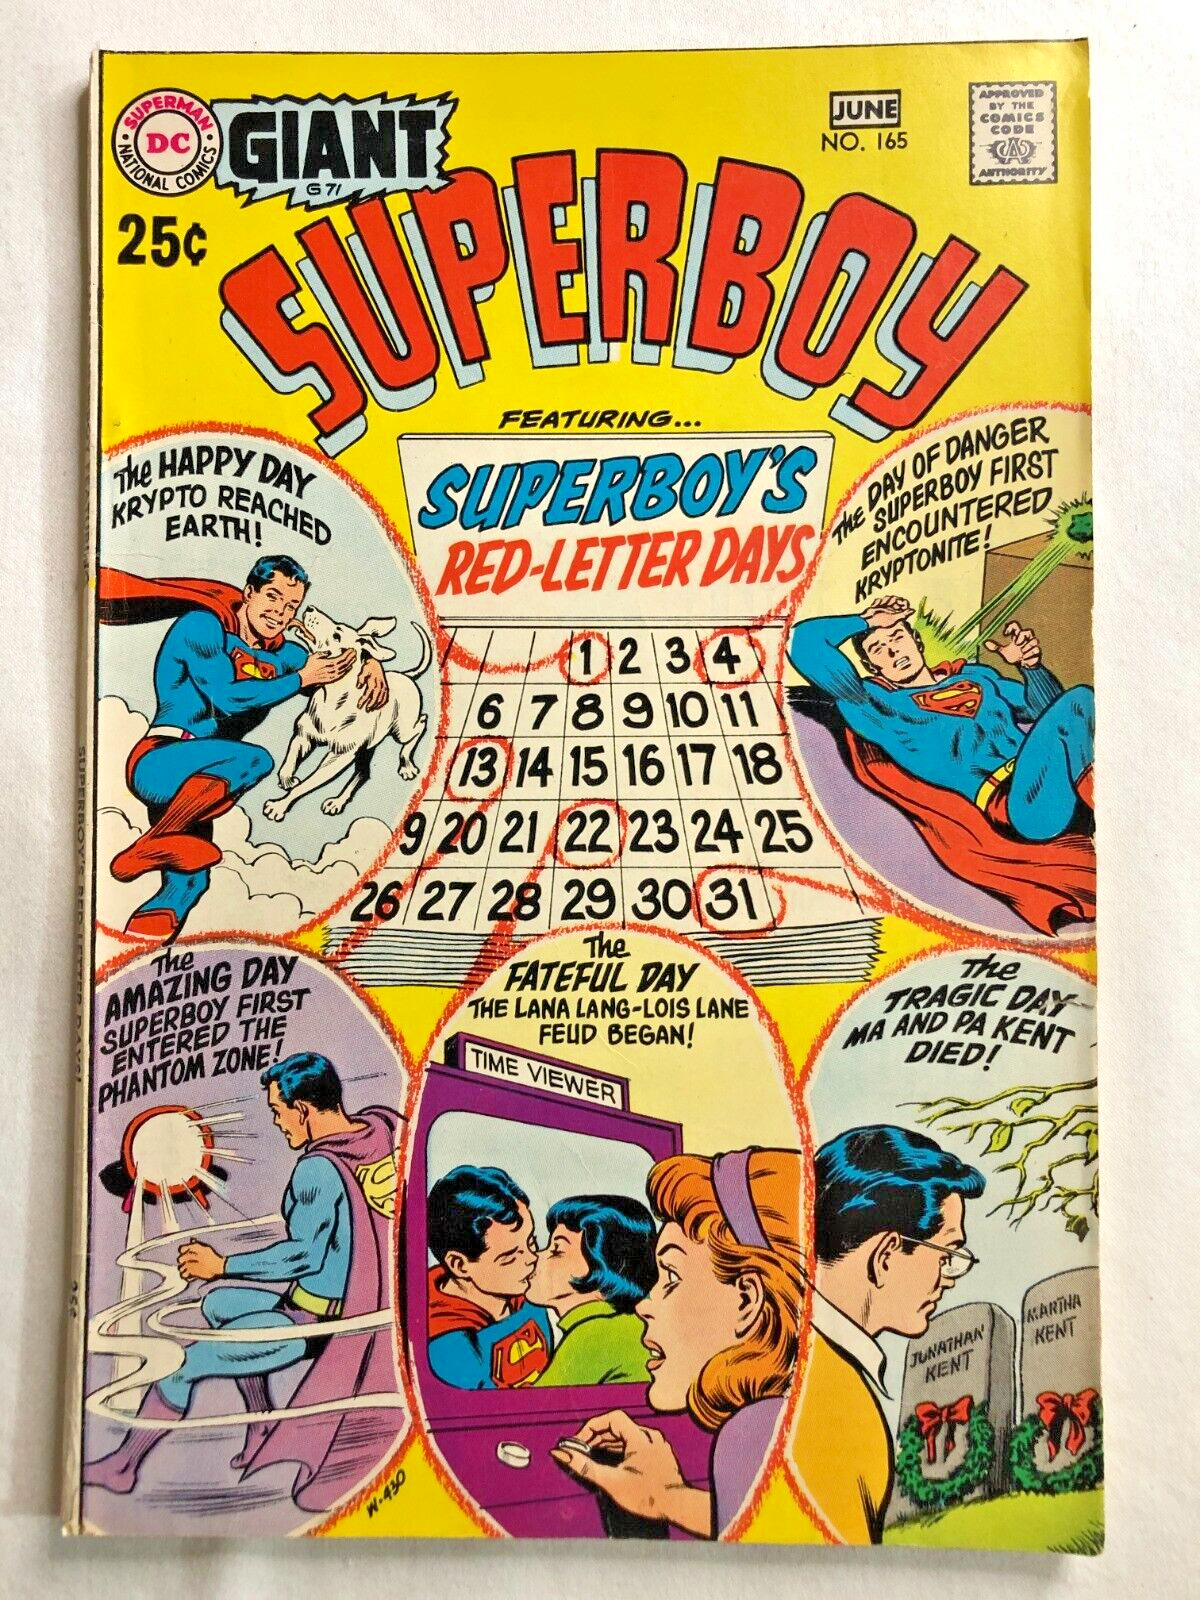 SUPERBOY #165 June 1970 Giant Sized Vintage Silver Age DC Comics Nice Condition